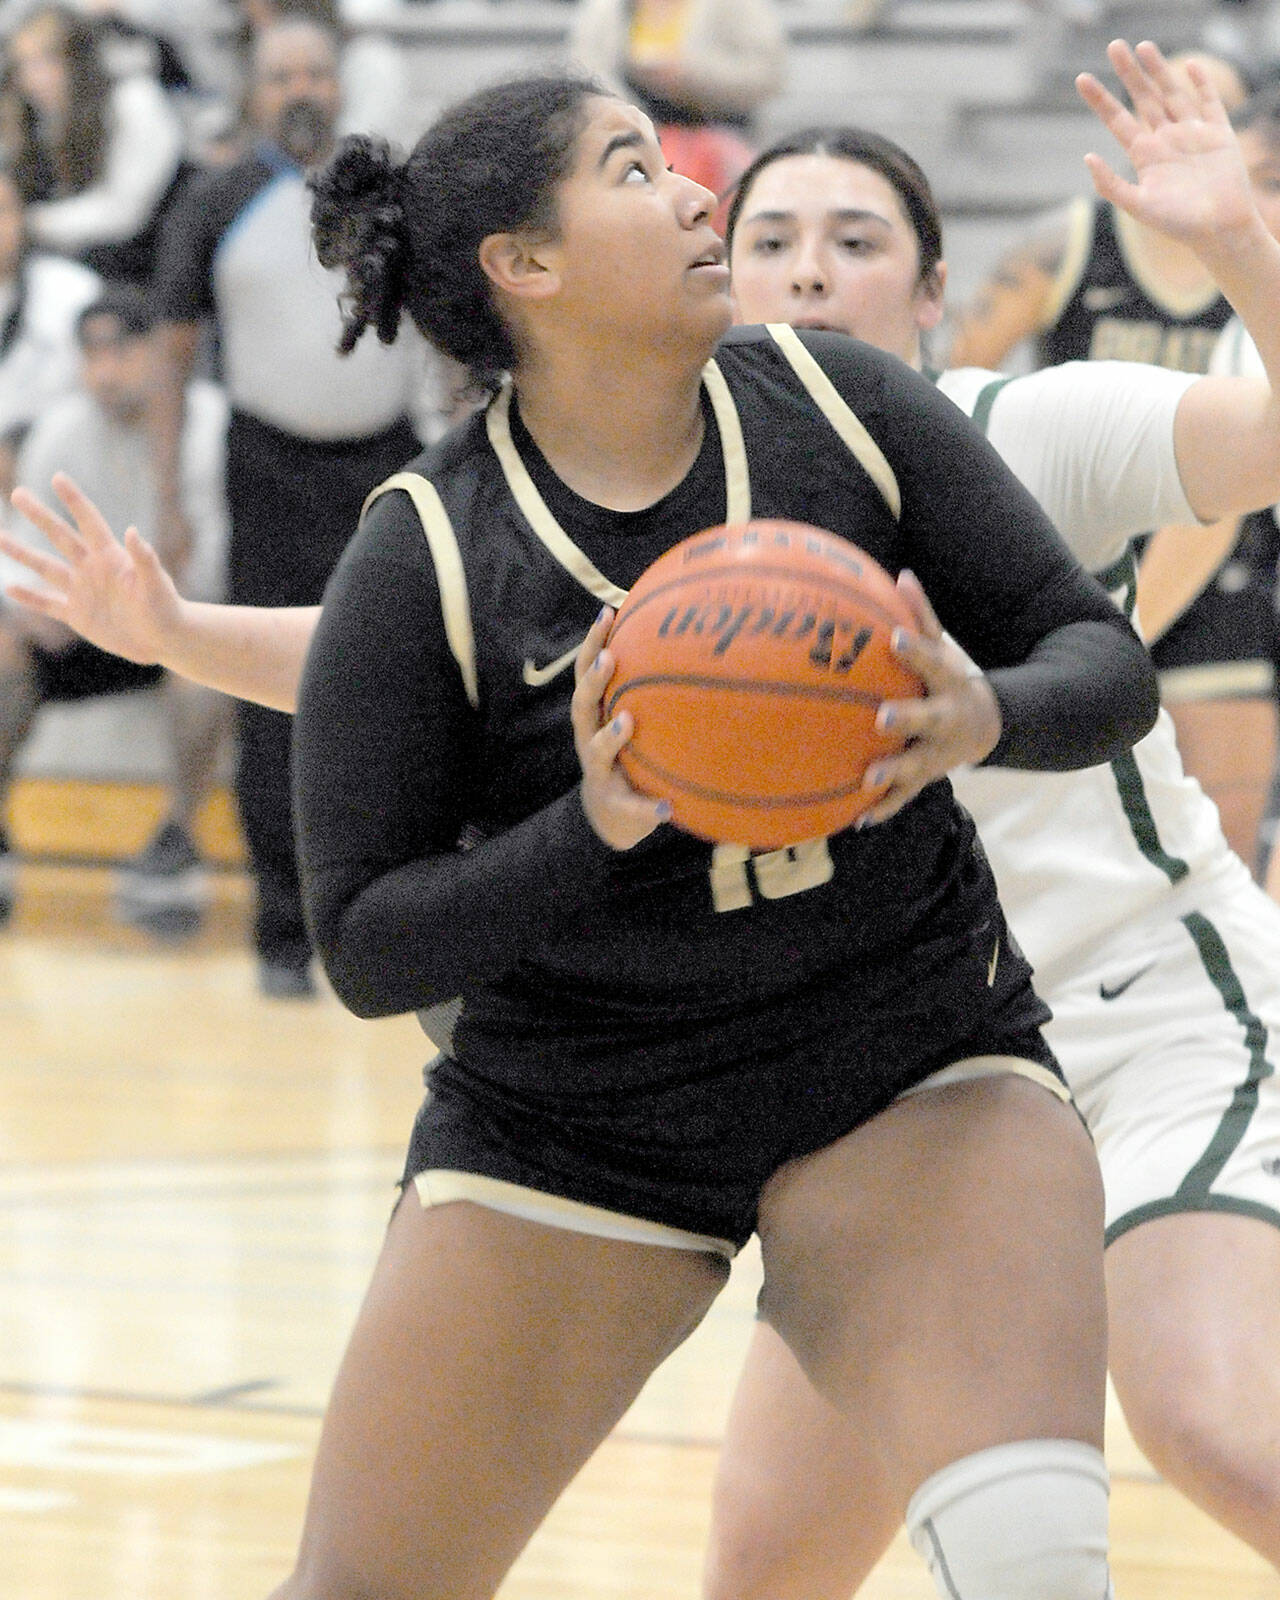 Peninsula’s Jelissa Julmist, a graduate of Sequim High School, looks for the net defended by Chemeketa’s Annie Bafford on Saturday in Port Angeles. (Keith Thorpe/Peninsula Daily News)